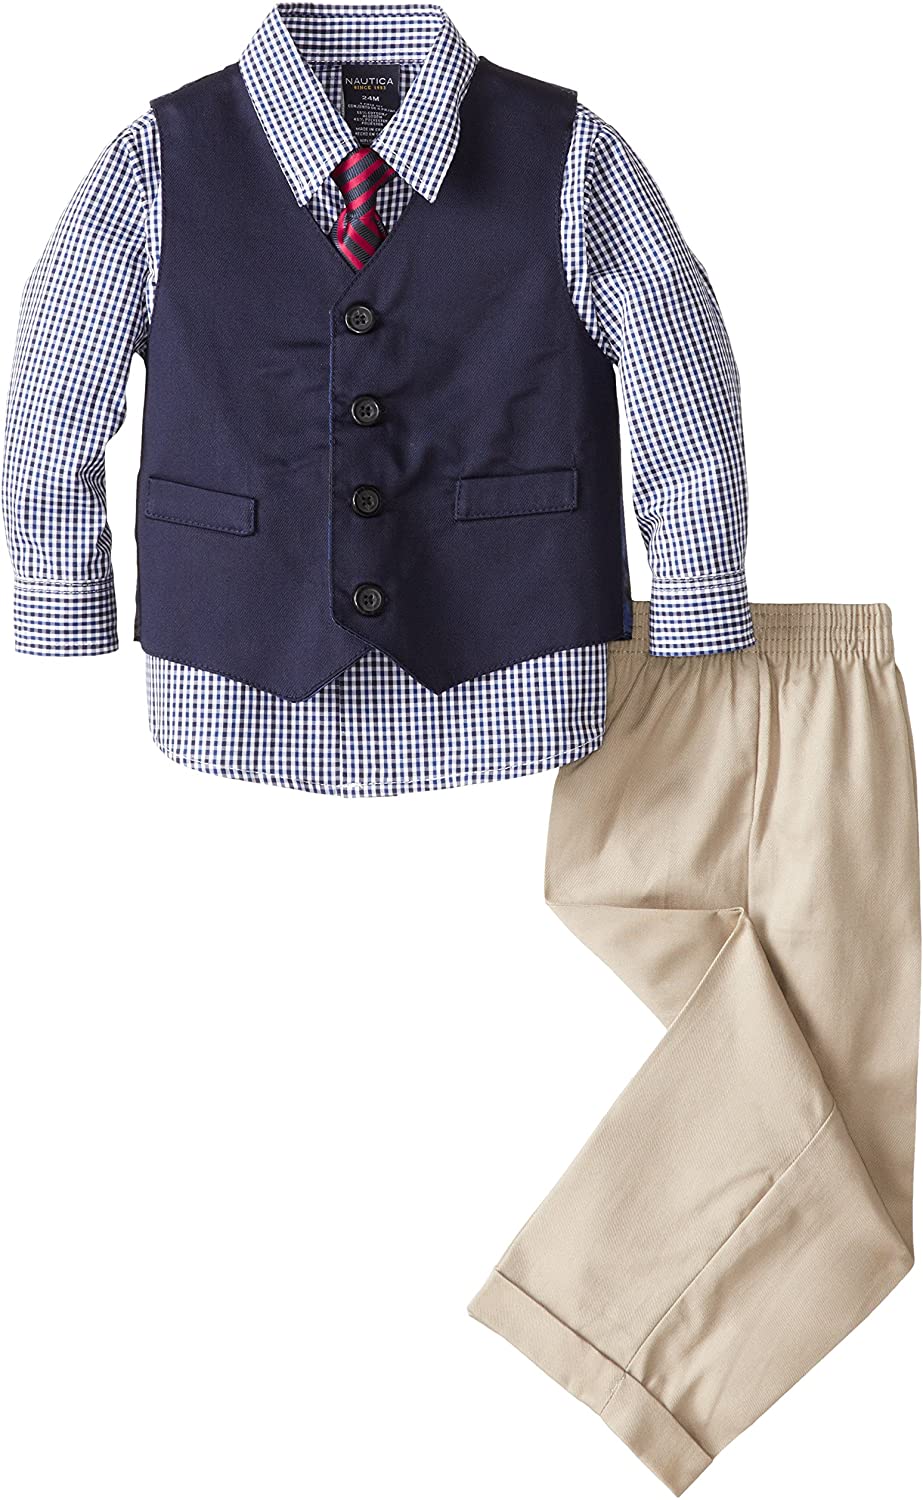 and Bow Ties Vests Pants Nautica Baby Boys 4-Piece Set with Dress Shirts 